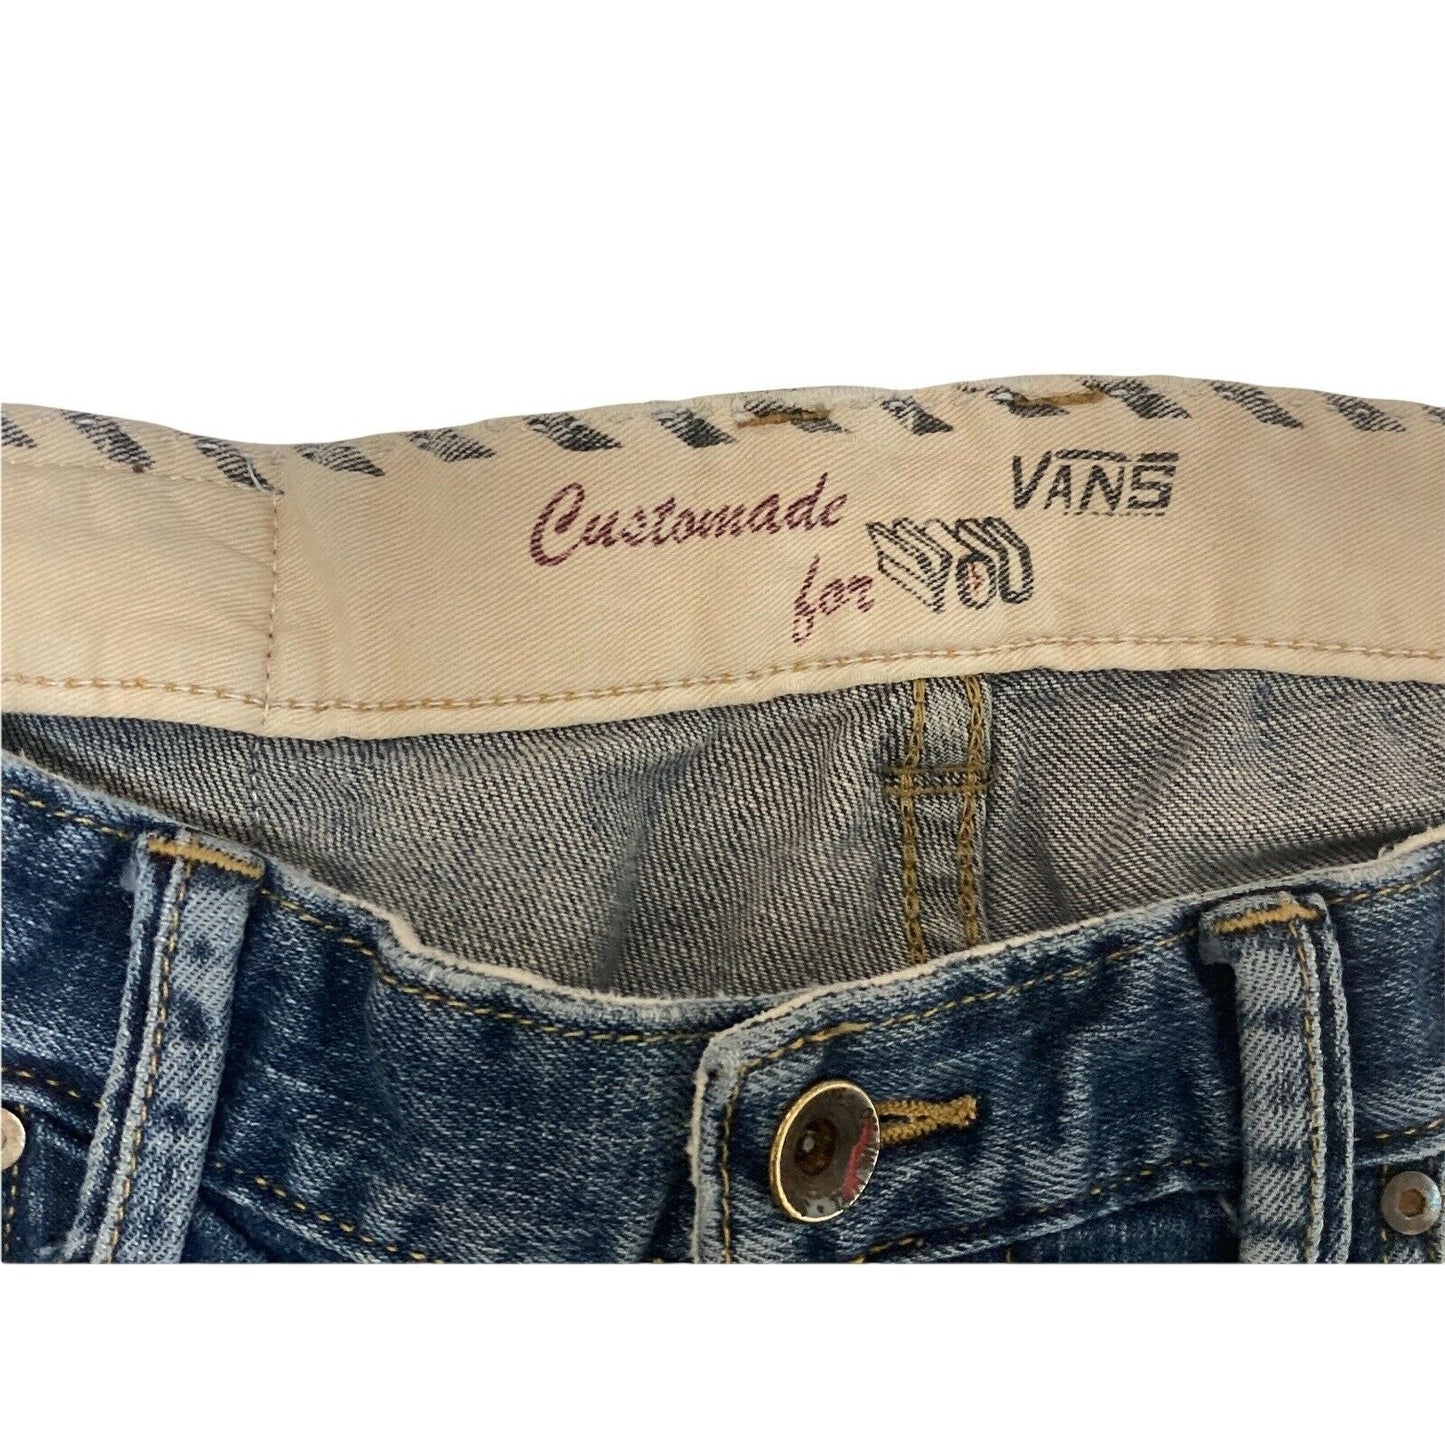 Vans Customade For You Straight Leg Button Fly Jeans 32x32 Medium Wash